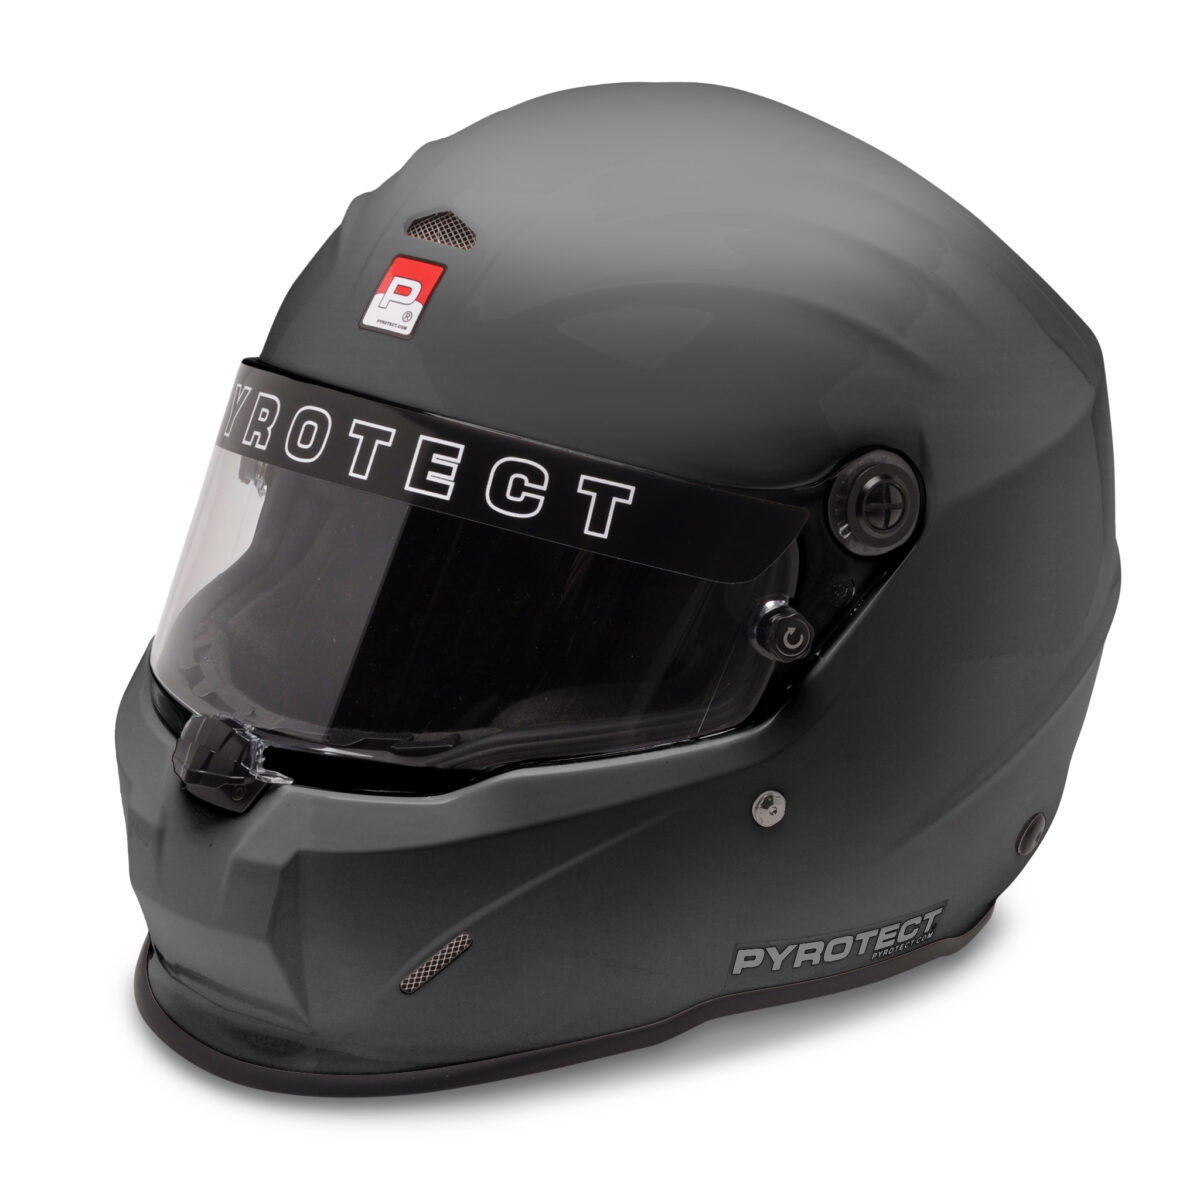 Pyrotect Safety HB802220 Helmet, ProSport Duckbill, Full Face, Snell SA2020, Head and Neck Support Ready, Flat Black, Small, Each